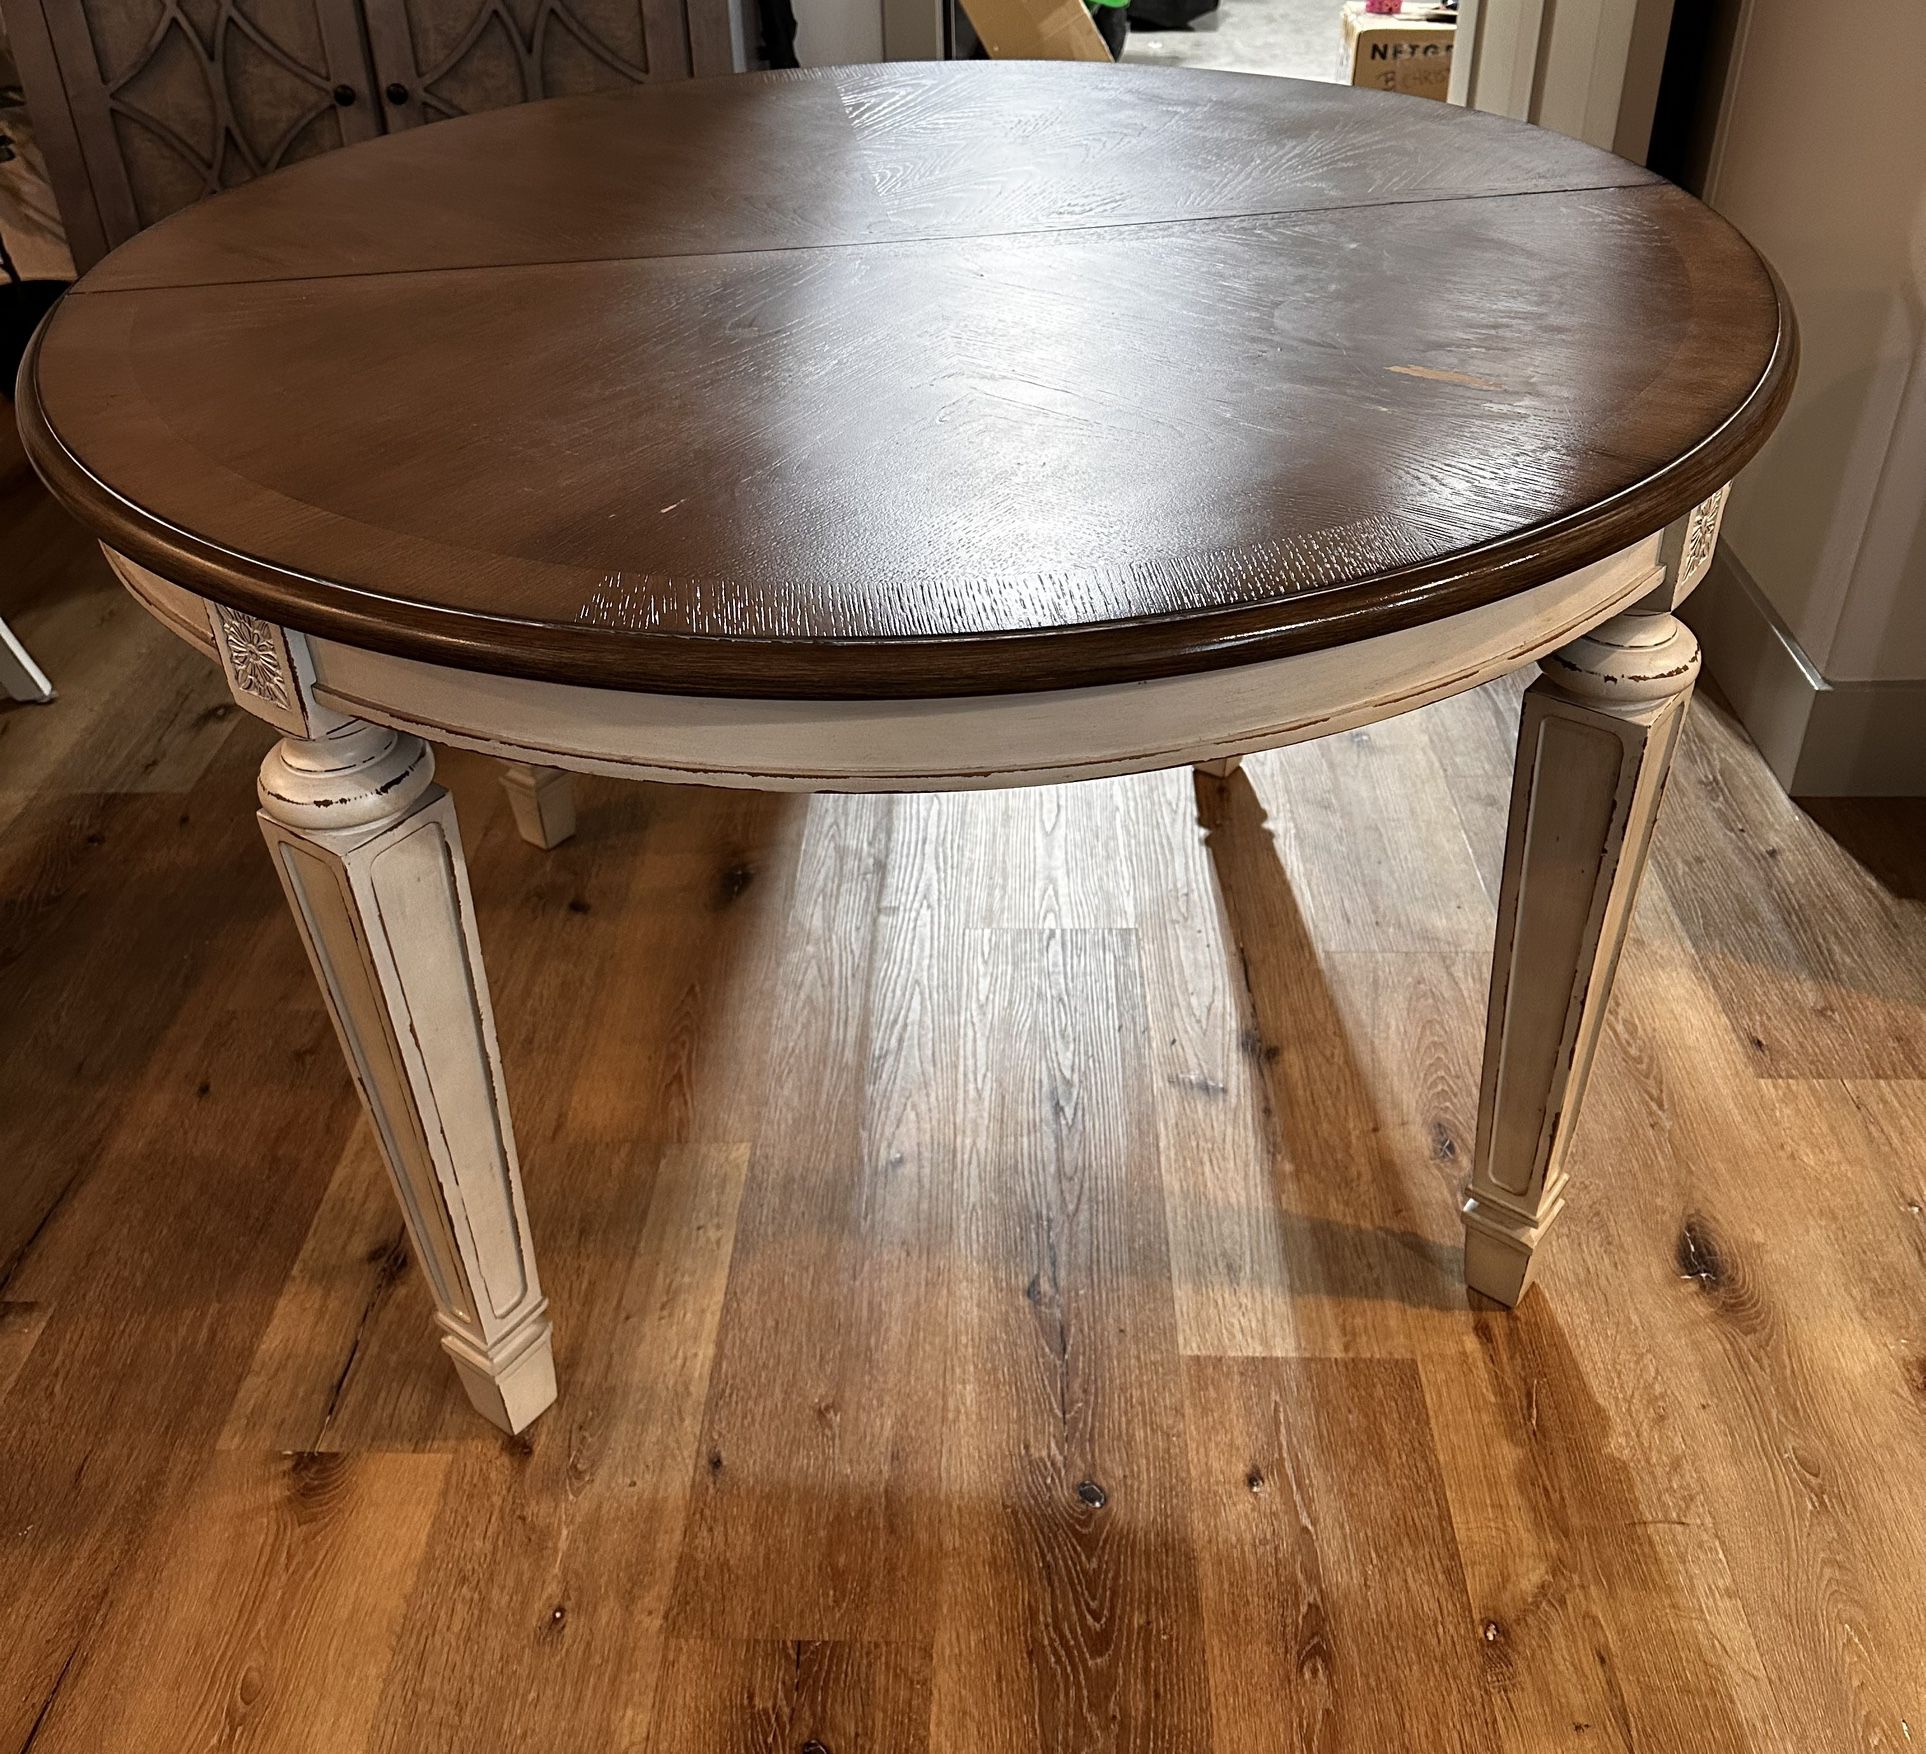 Used Dining table